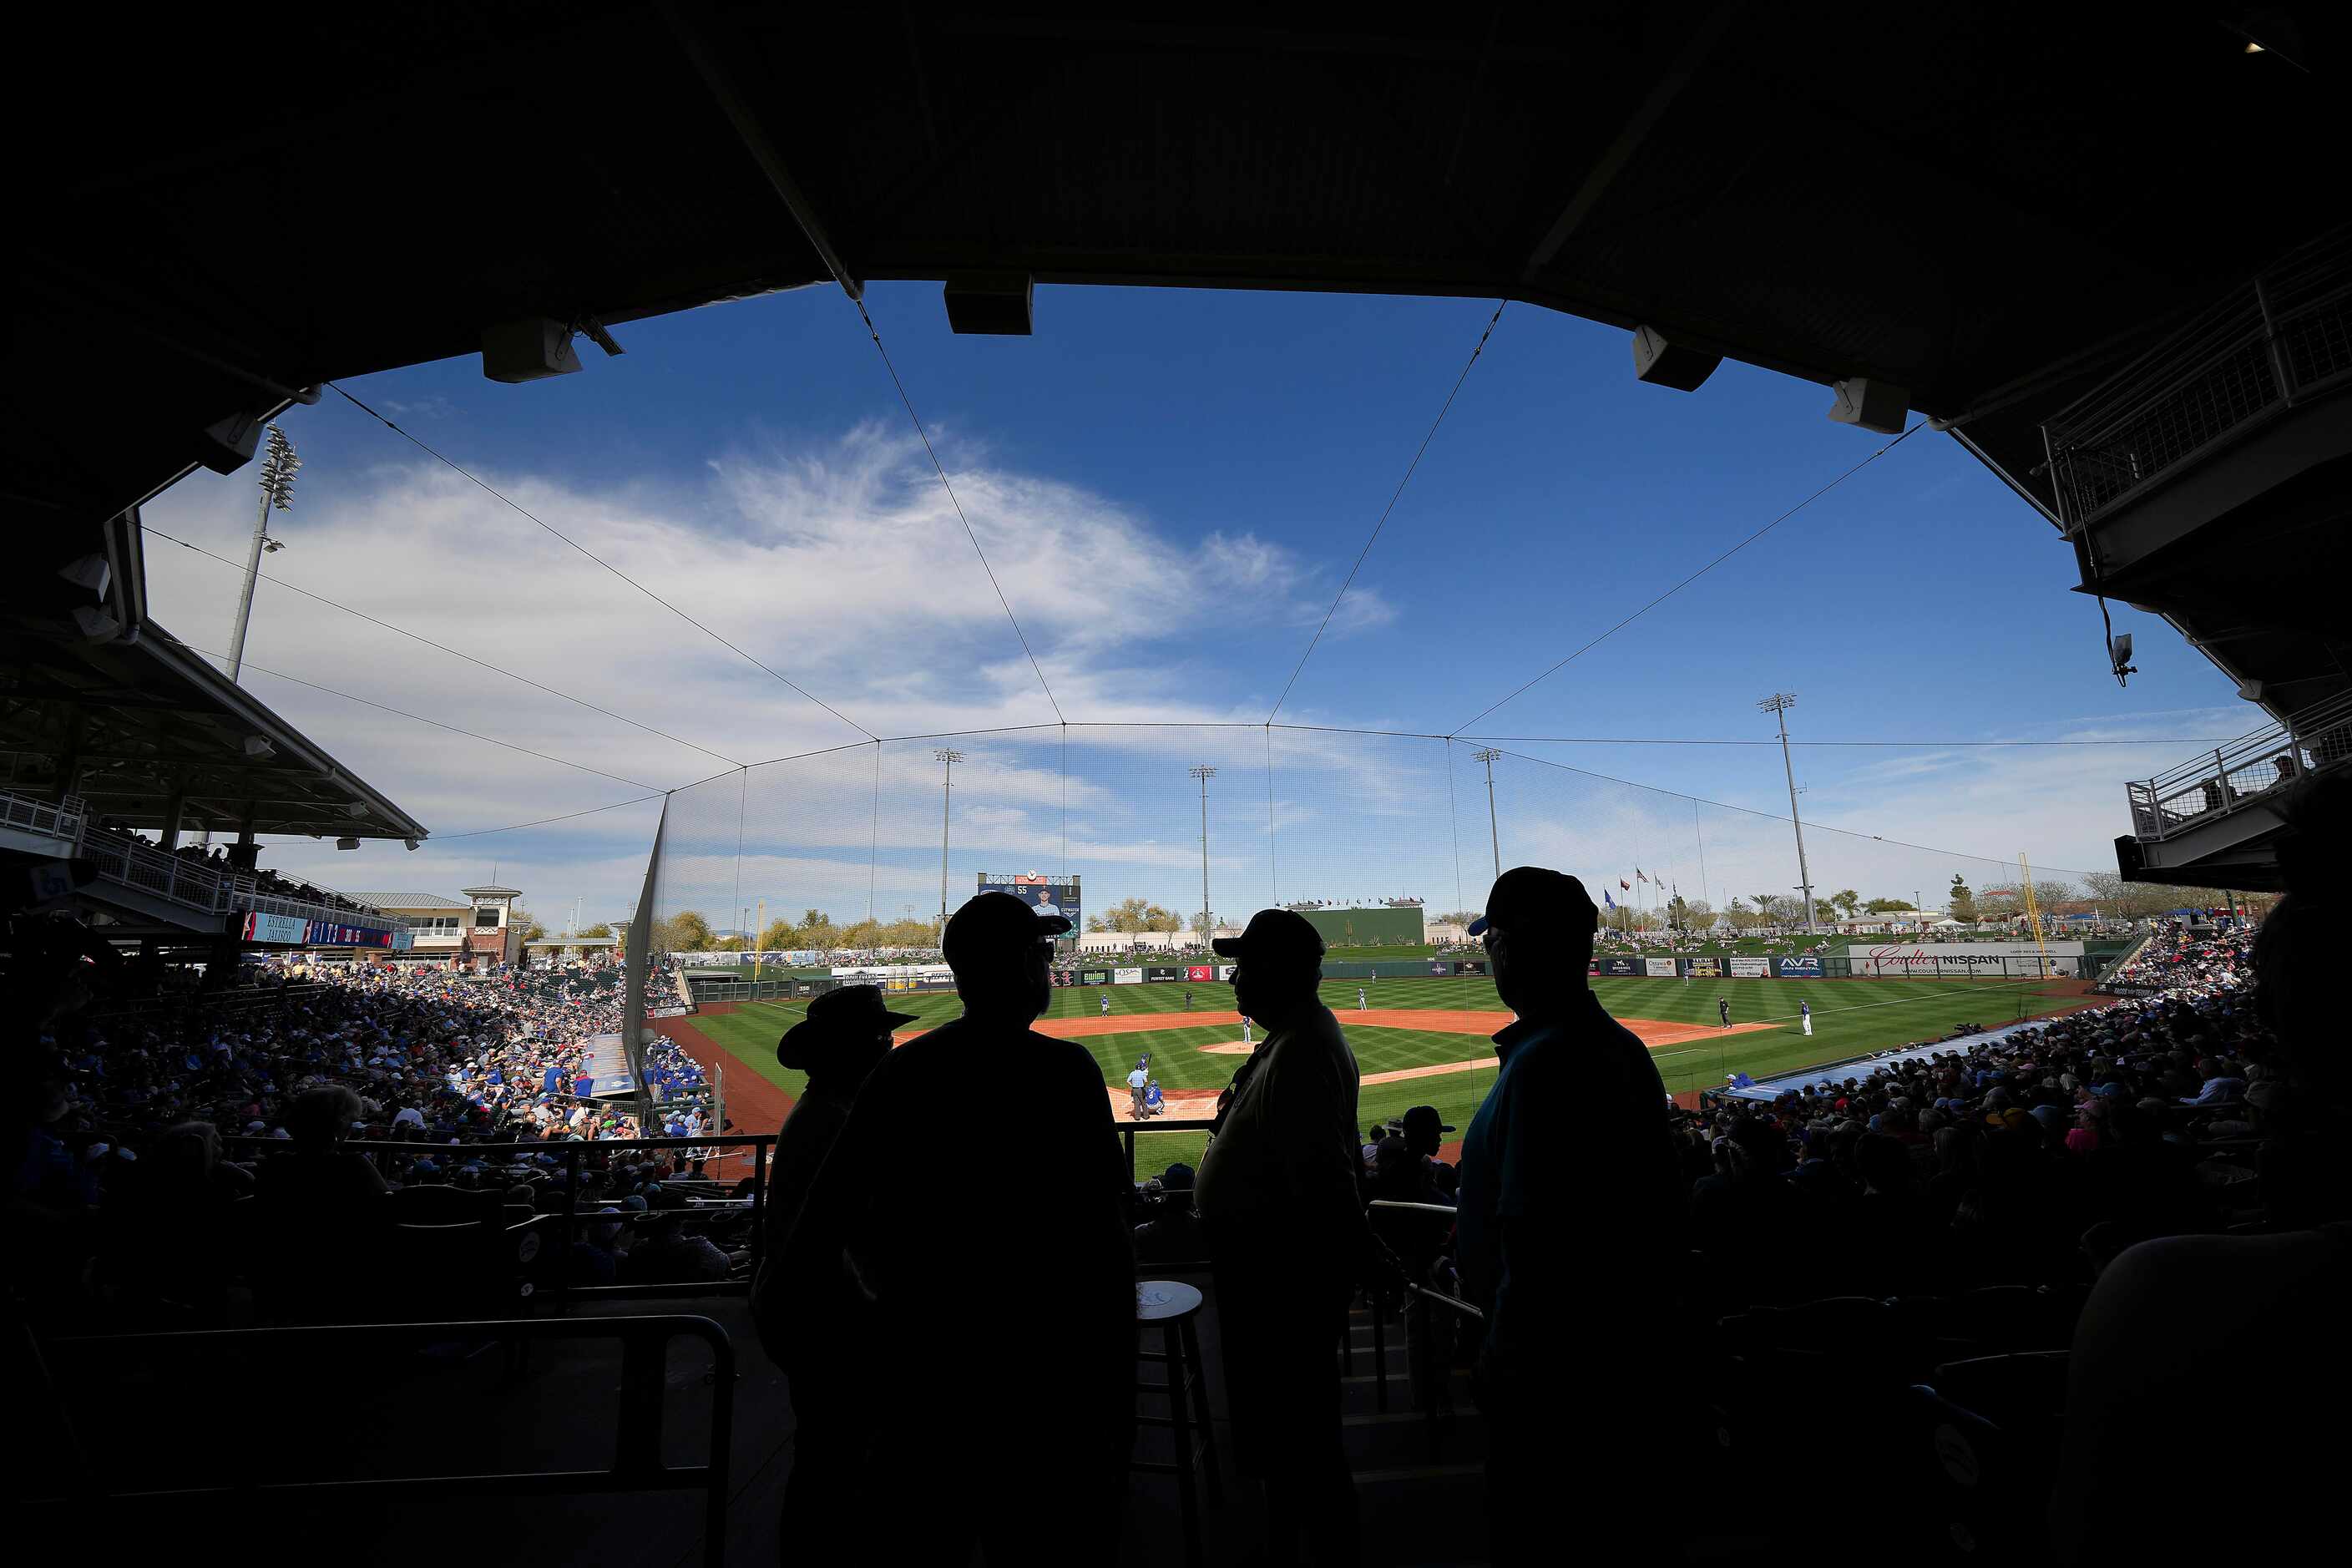 The Texas Rangers face the Kansas City Royals in a spring training game at Surprise Stadium...